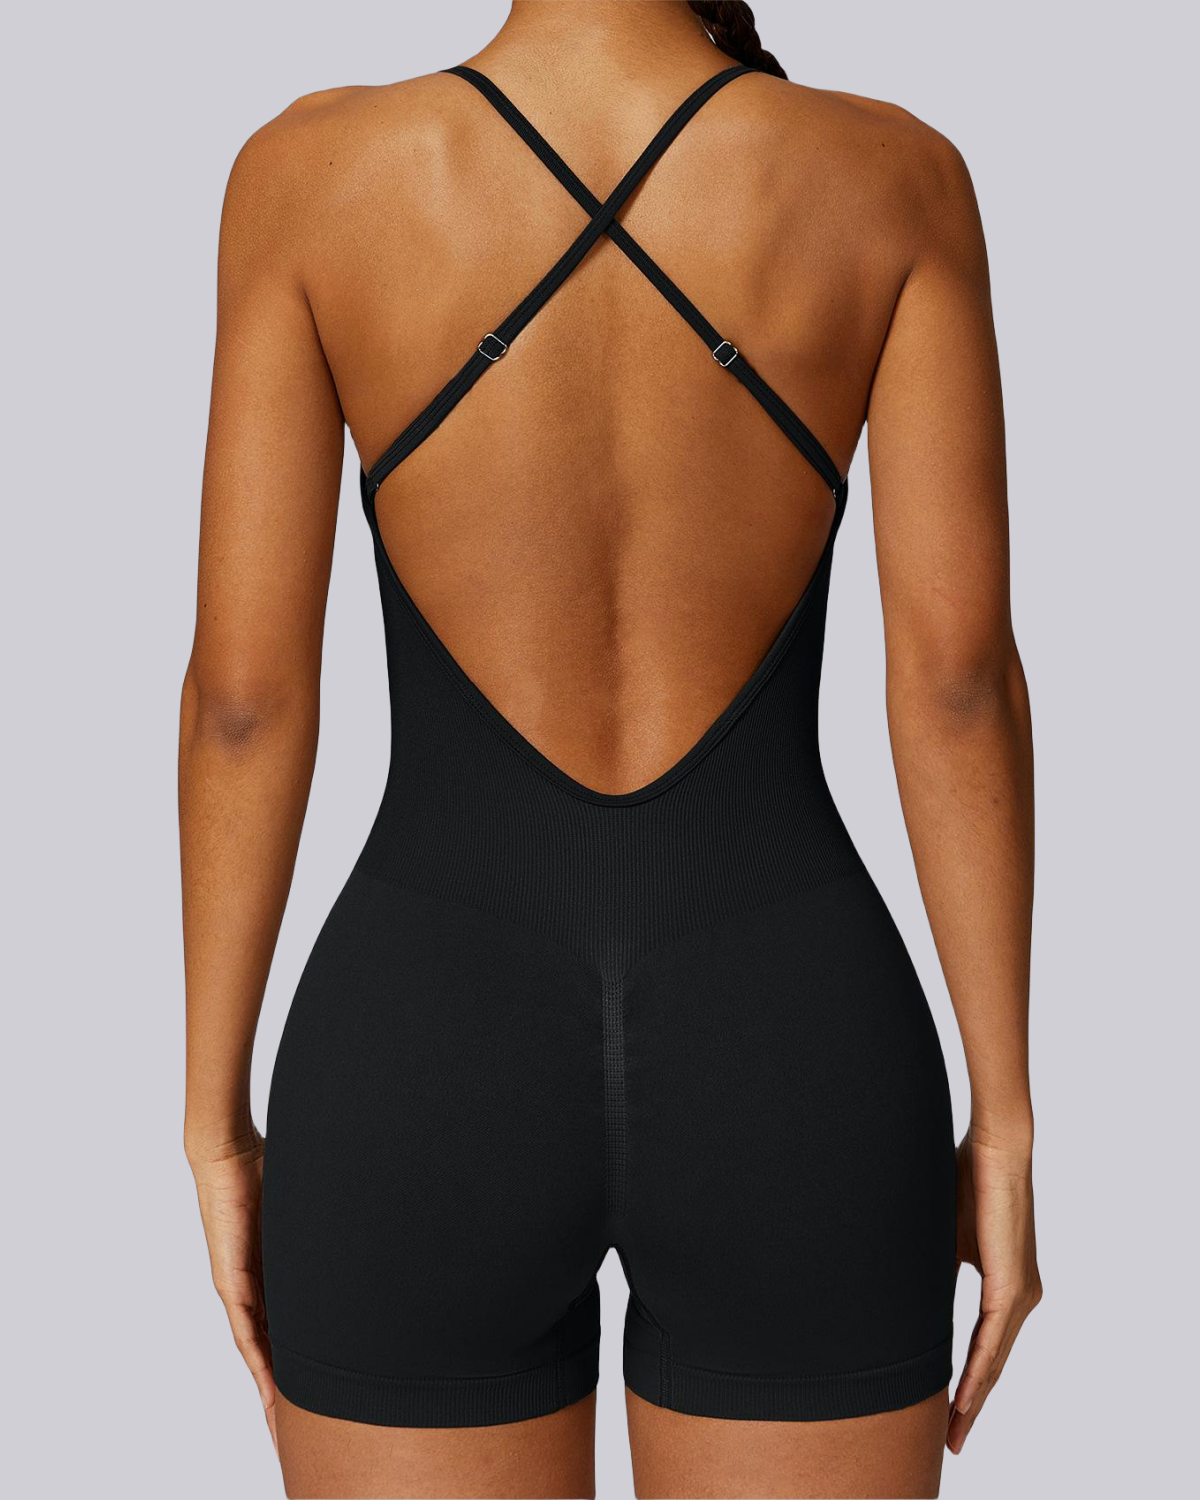 Backless Tight-fitting Bodysuit